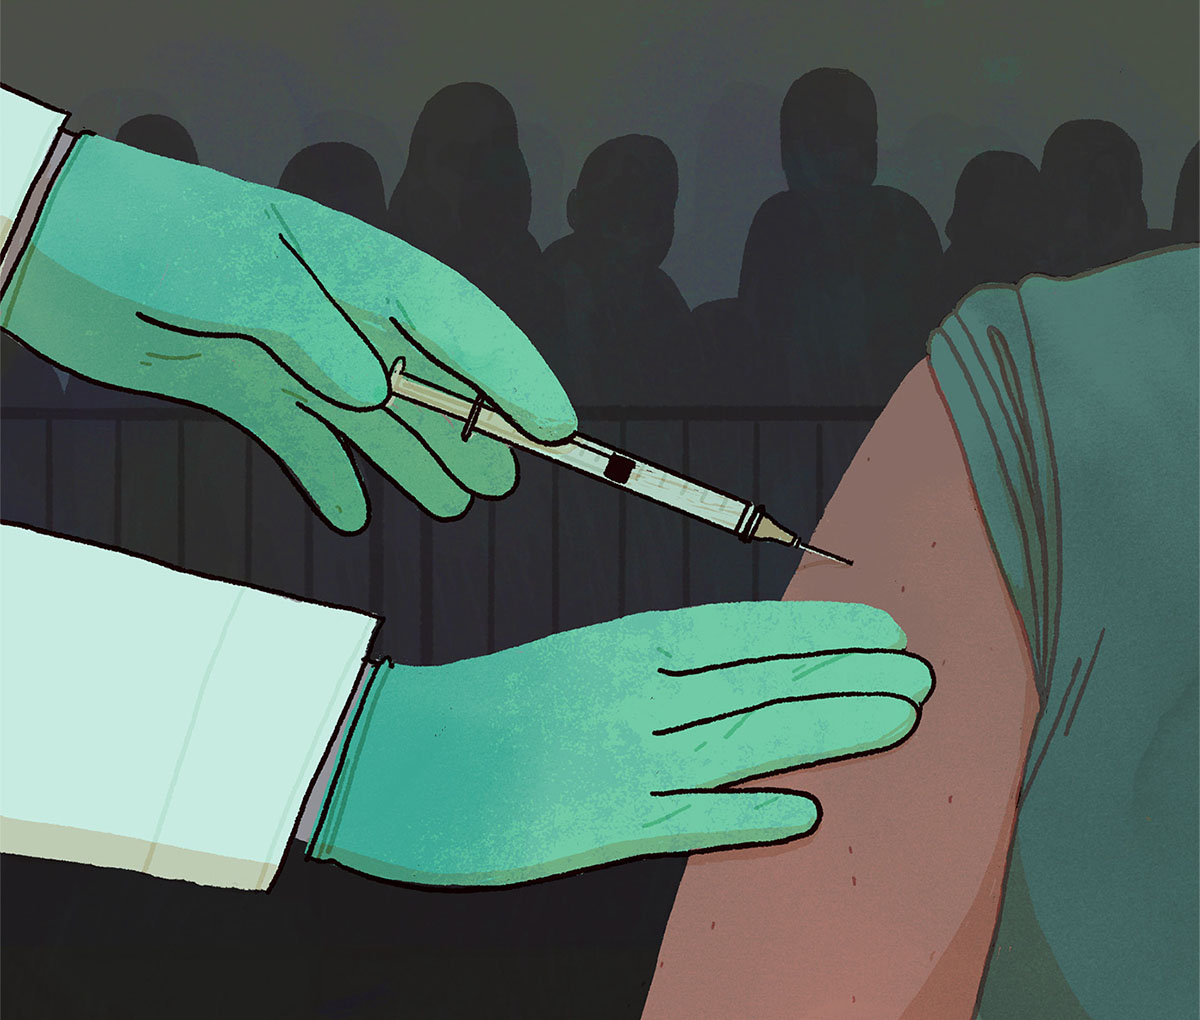 An vaccine being injected into an arm.